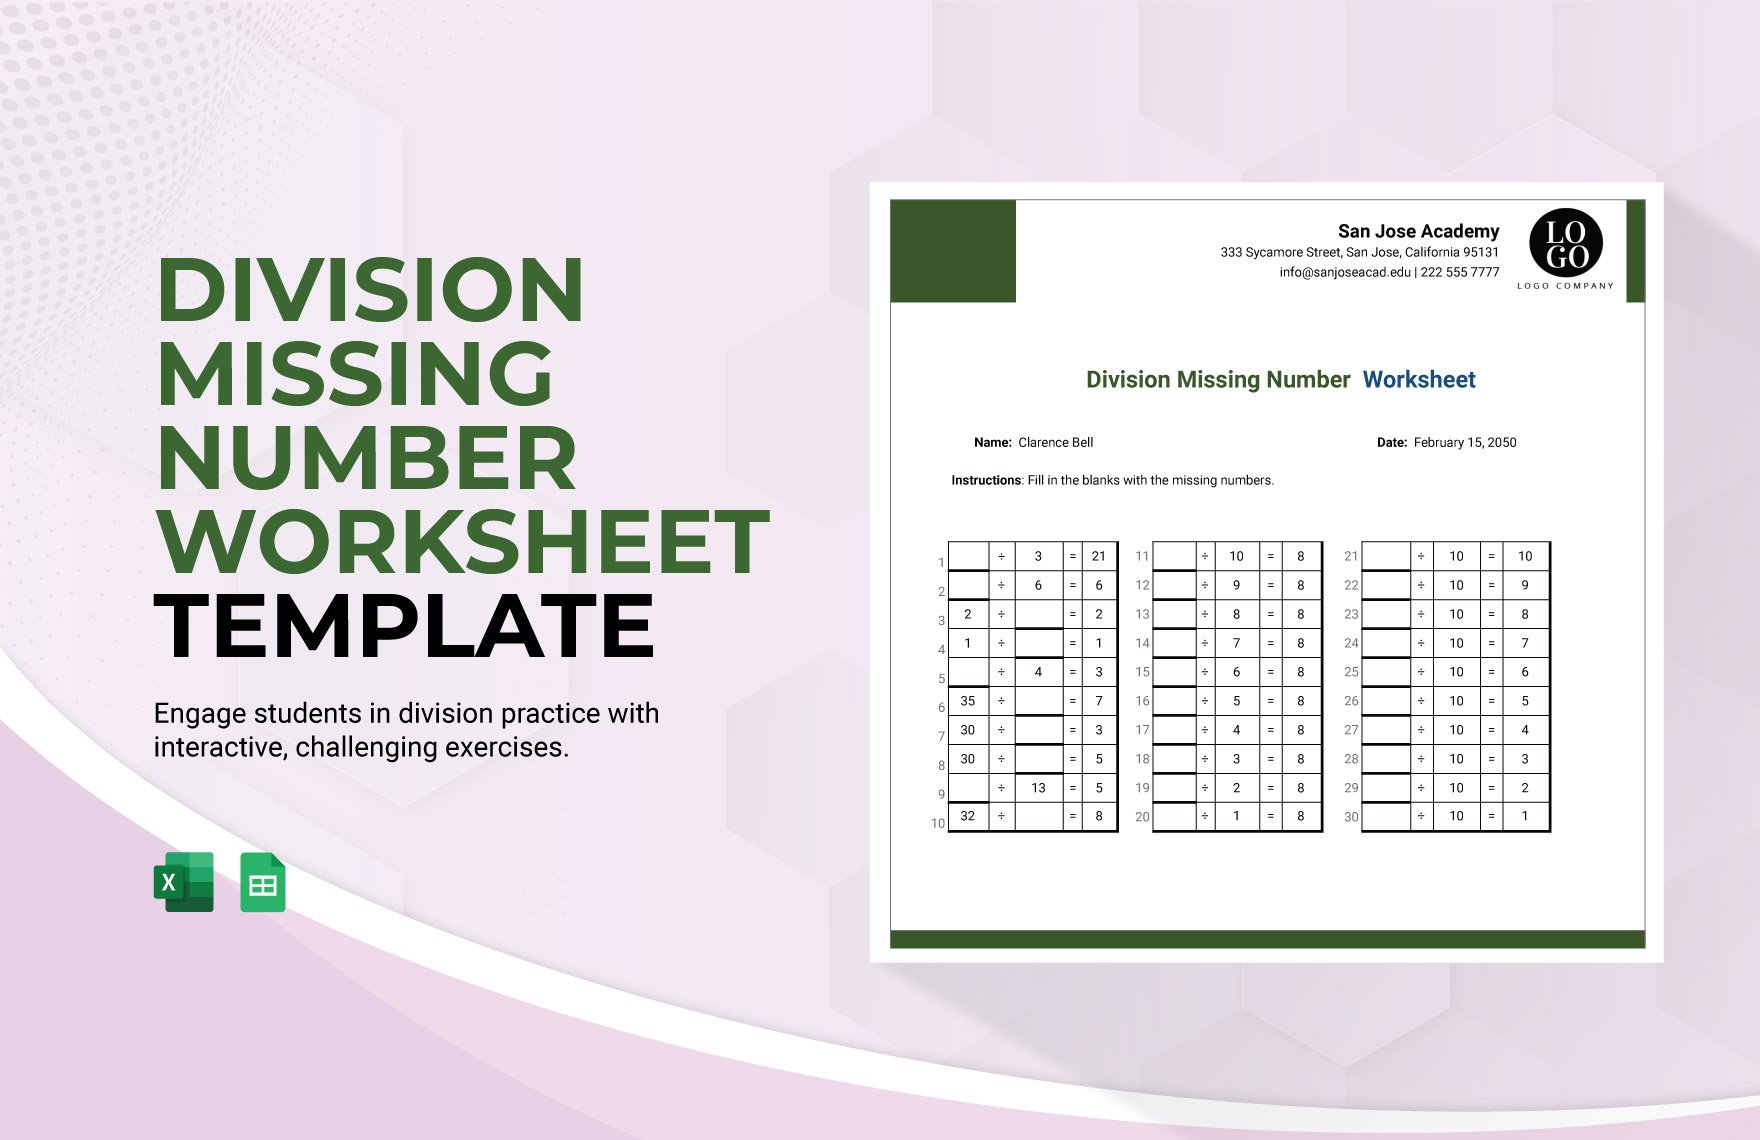 Division Missing Numbers Worksheet Template in Excel, Google Sheets